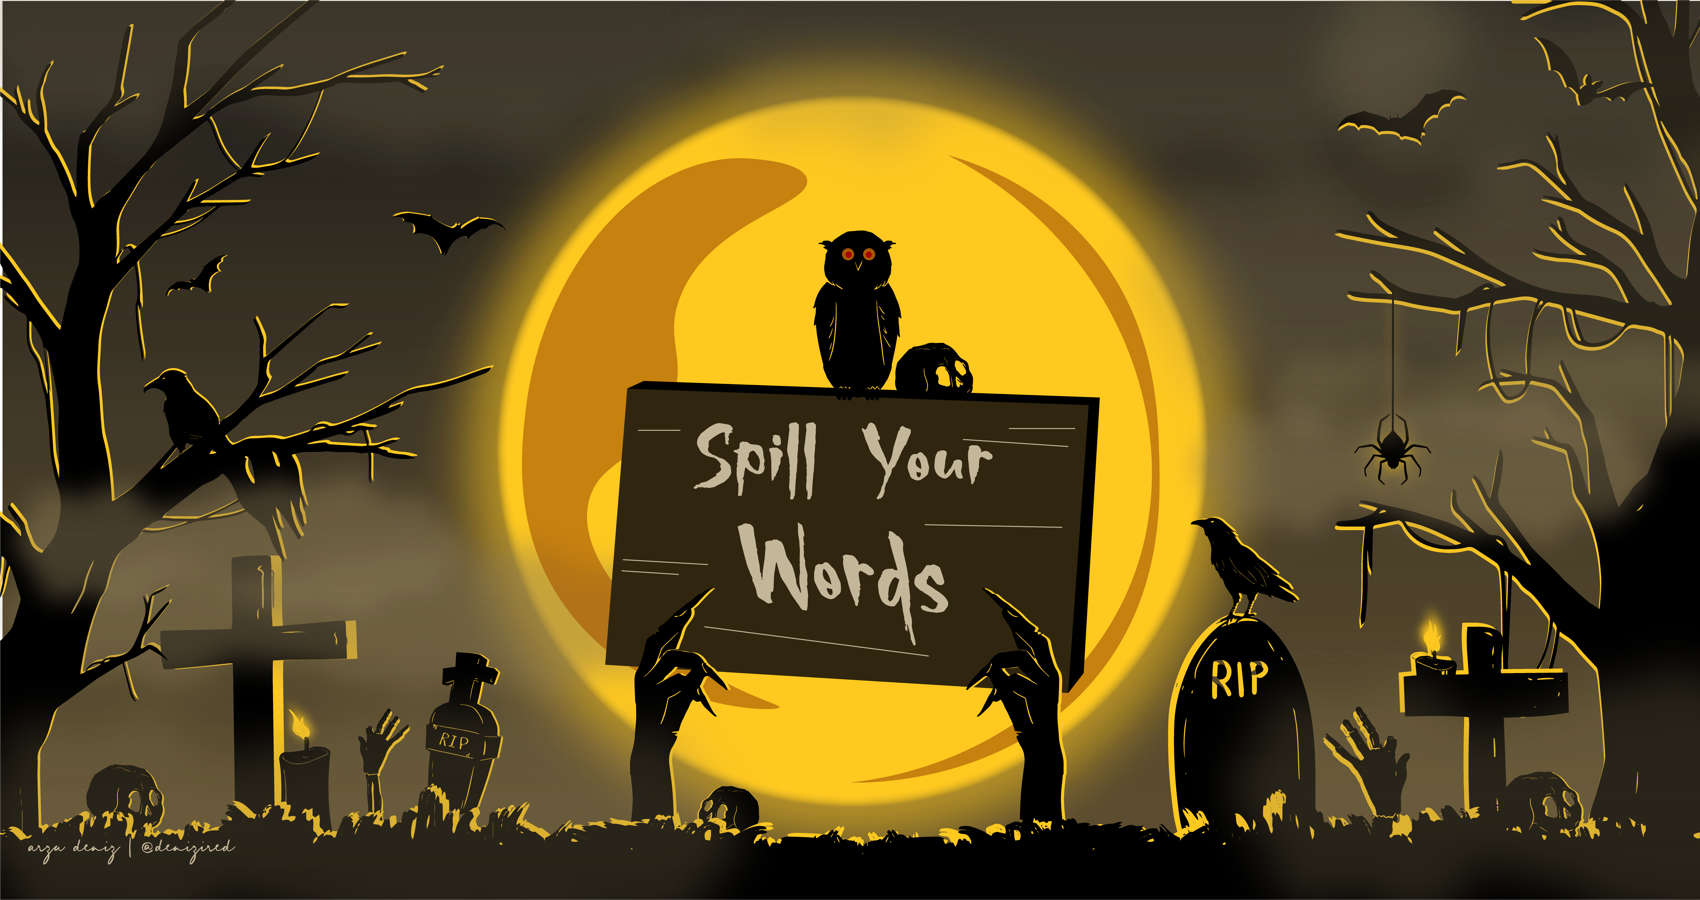 13 Days of Halloween series at Spillwords.com